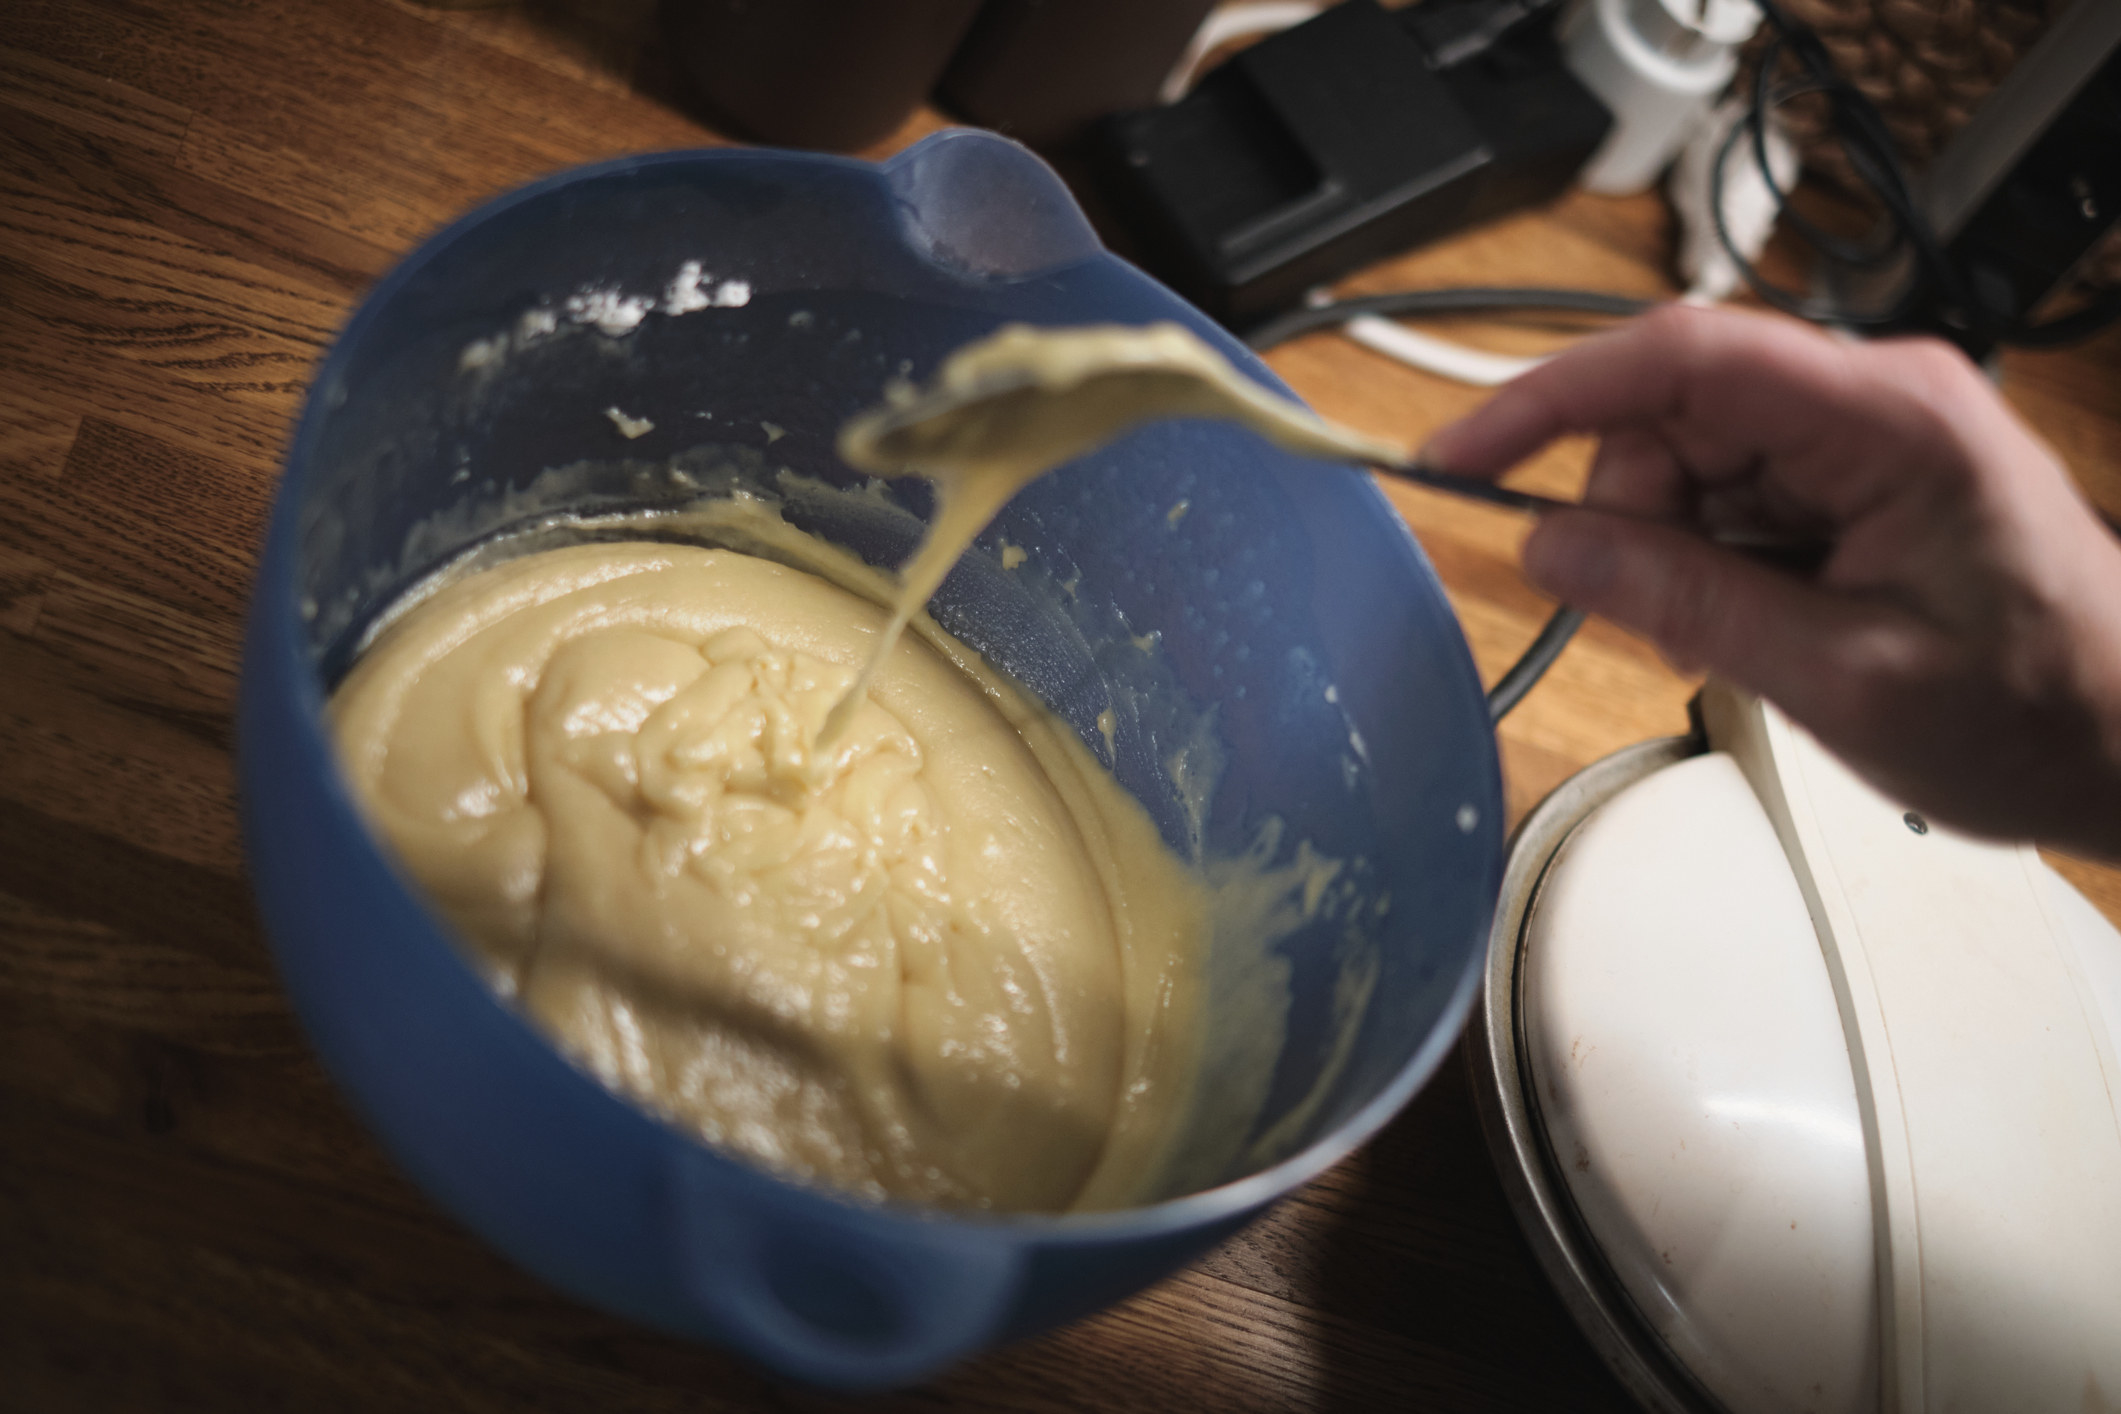 Hand with spoon mixing cake batter for Christmas baking in a blue bowl